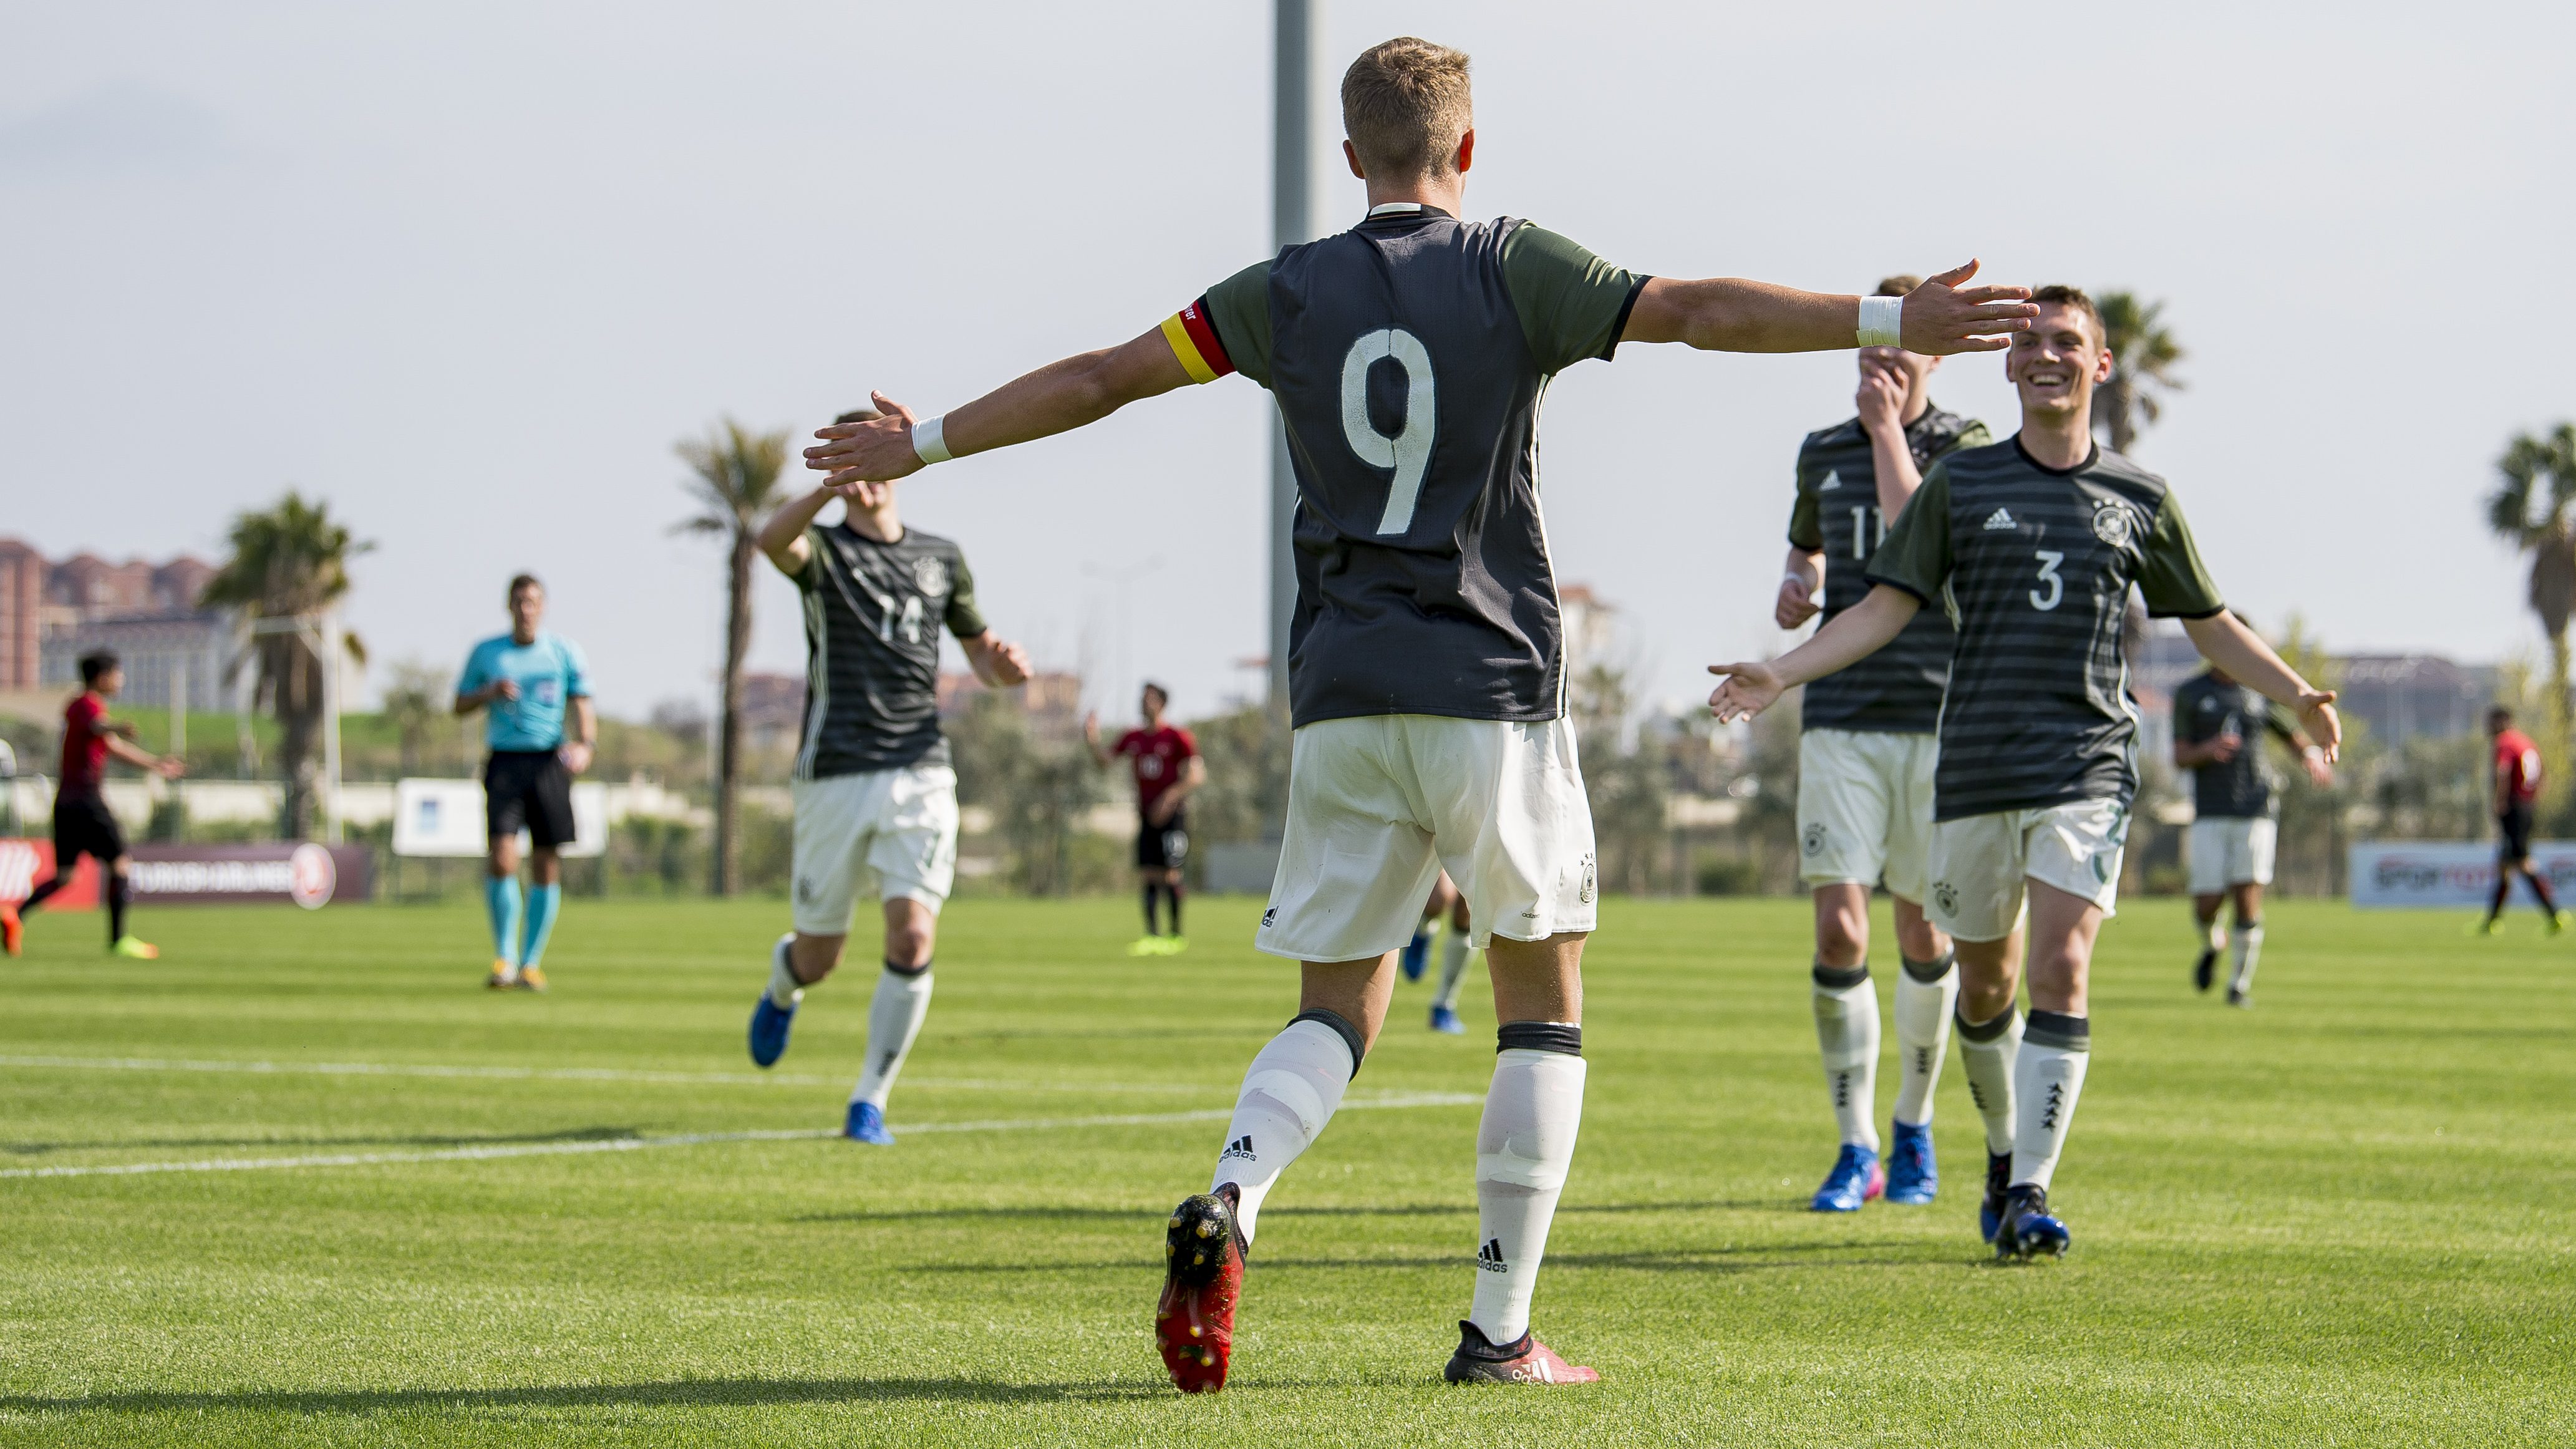 MANAVGAT, TURKEY - MARCH 28: Jann-Fiete Arp of Germany celebrates the first goal for his team with his teammates during the UEFA U17 elite round match between Germany and Turkey on March 28, 2017 in Manavgat, Turkey. (Photo by Alexander Scheuber/Bongarts/Getty Images)